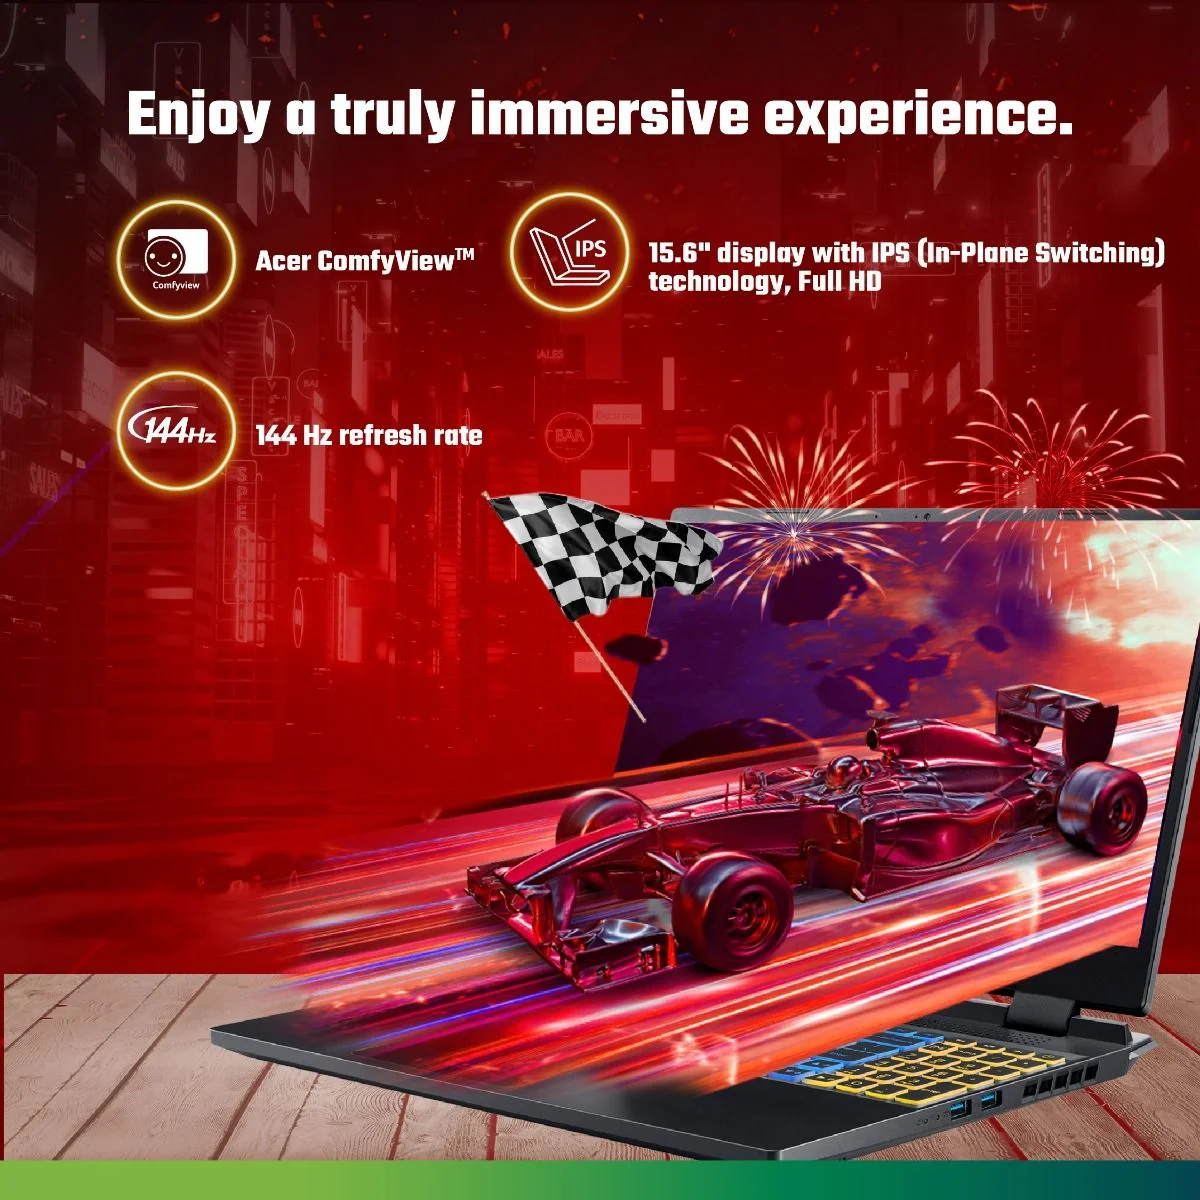 ACER NITRO 5 AMD Breaking the Sound Barrier Better audio delivers a competitive edge as well as a more immersive experience through dual 2W speakers. With DTS:X® Ultra, sounds are clear and can be delivered in a 3D spatial soundscape, allowing you to hear where your opponents are coming from with pinpoint precision.